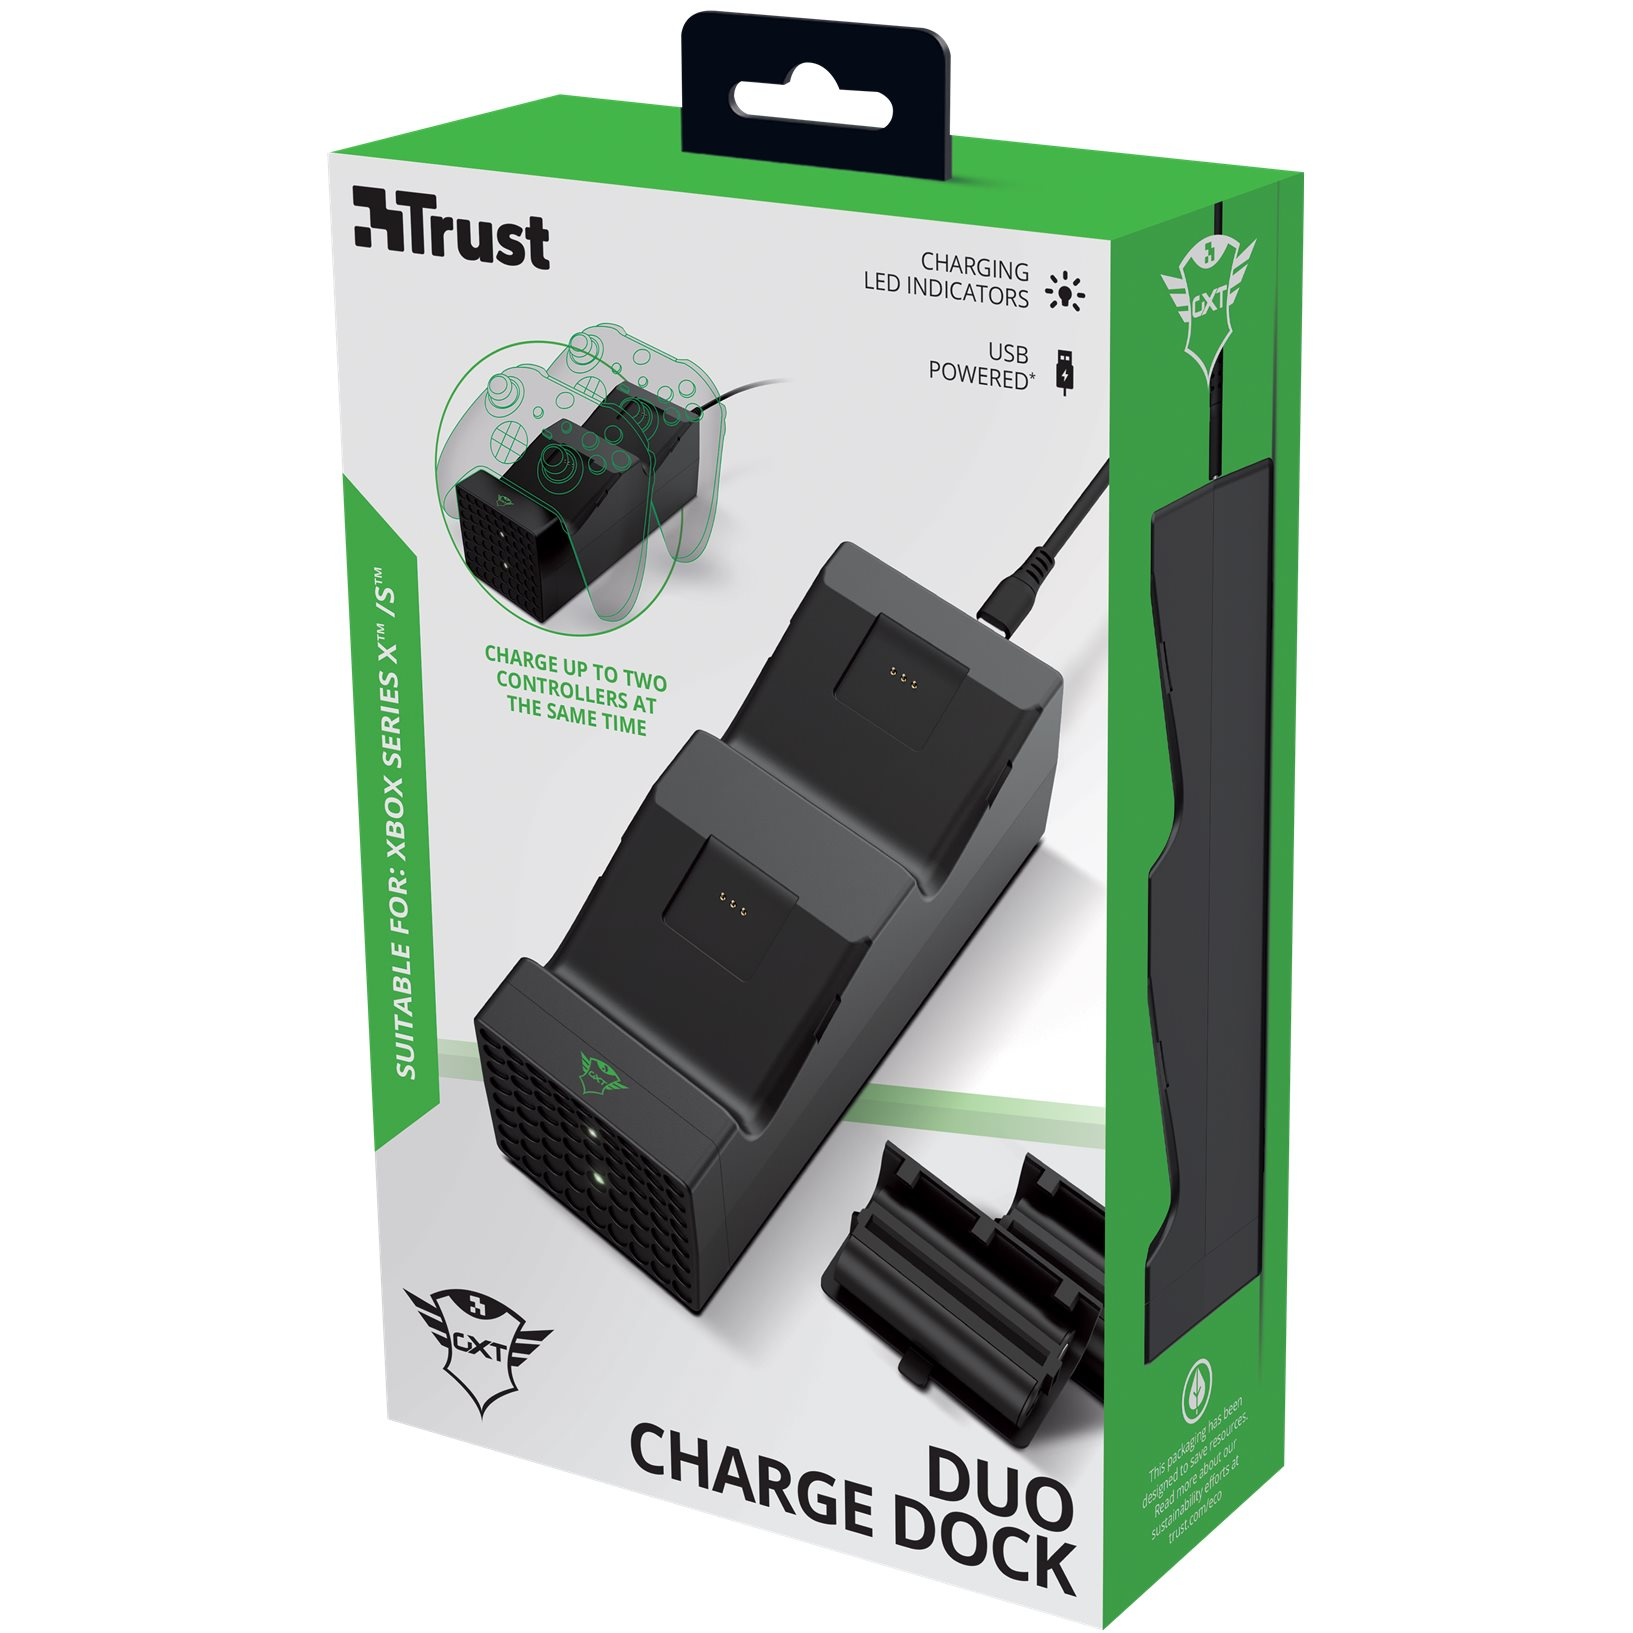 8713439241778 TRUST GXT250 DUO CHARGE DOCK XBSX - Oplader Computer & IT,Xbox,Xbox tilbehør 18900007790 24177